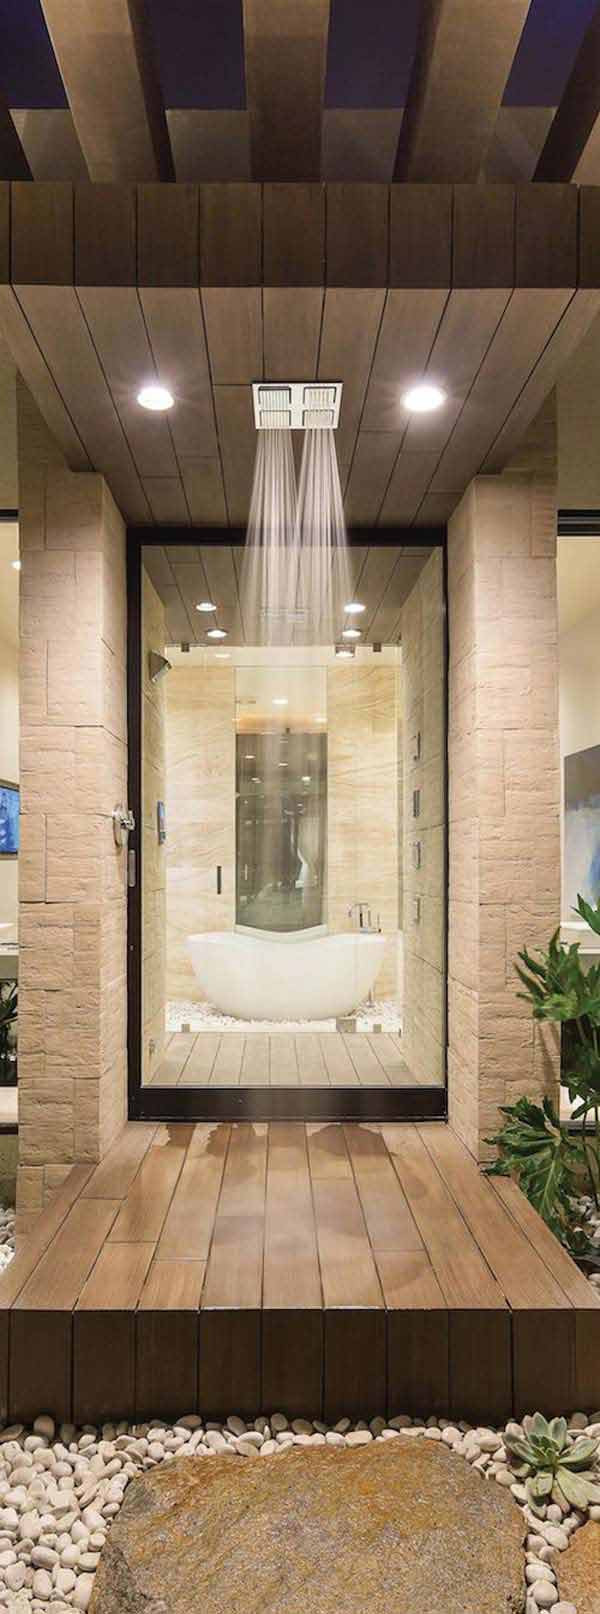 Picture Of Bathroom Showers
 25 Must See Rain Shower Ideas for Your Dream Bathroom